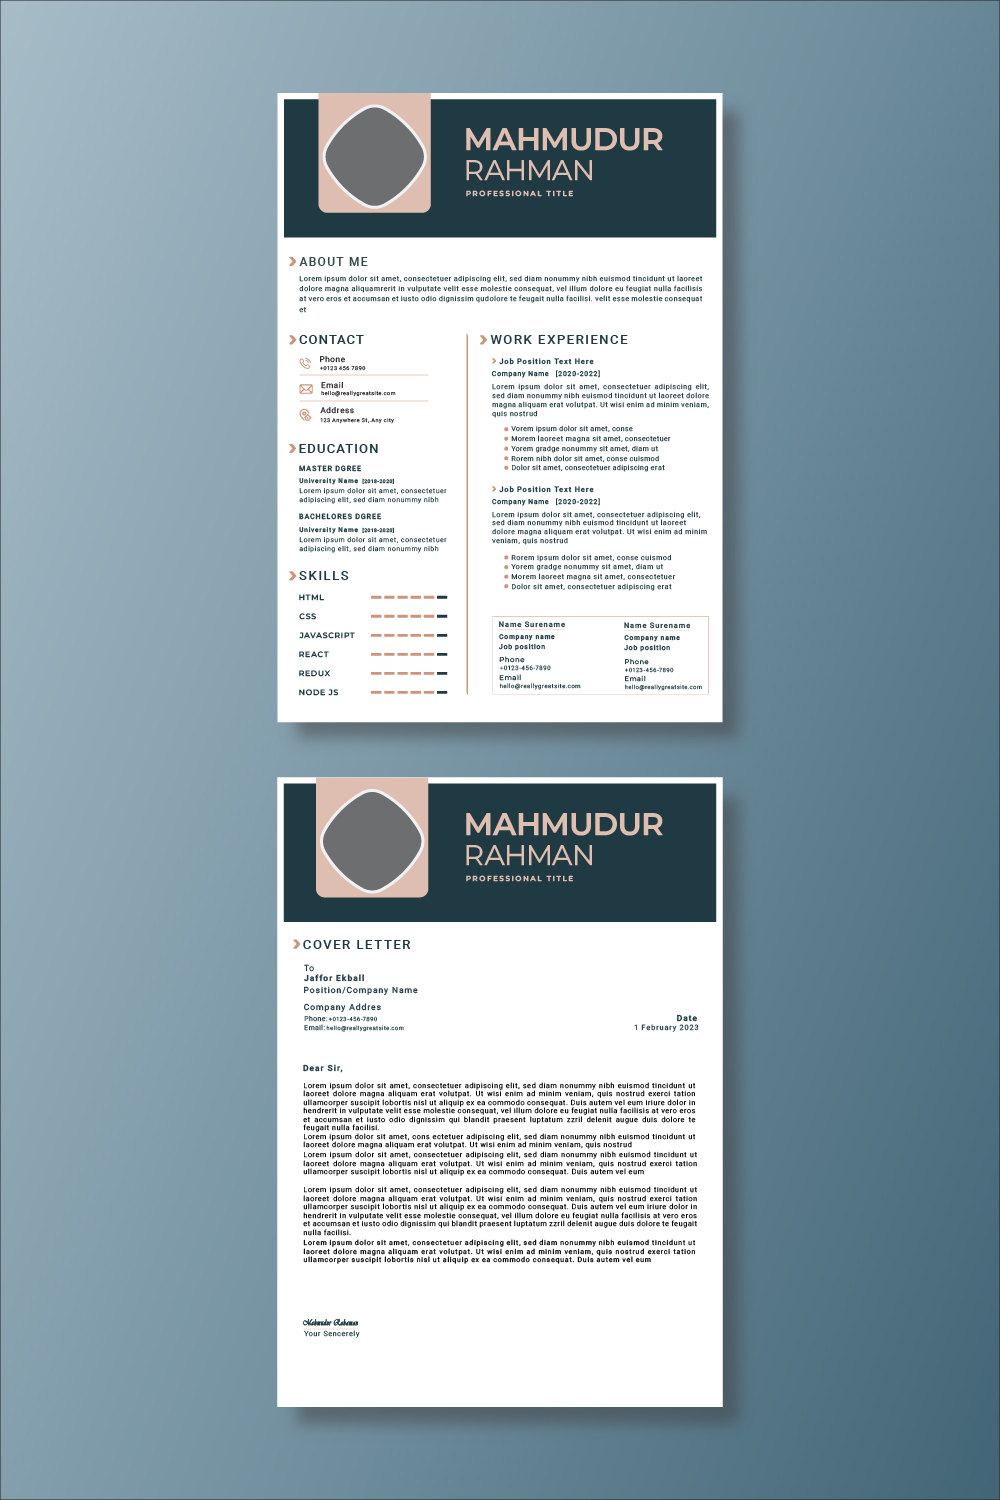 Two pages of a professional resume on a blue background.